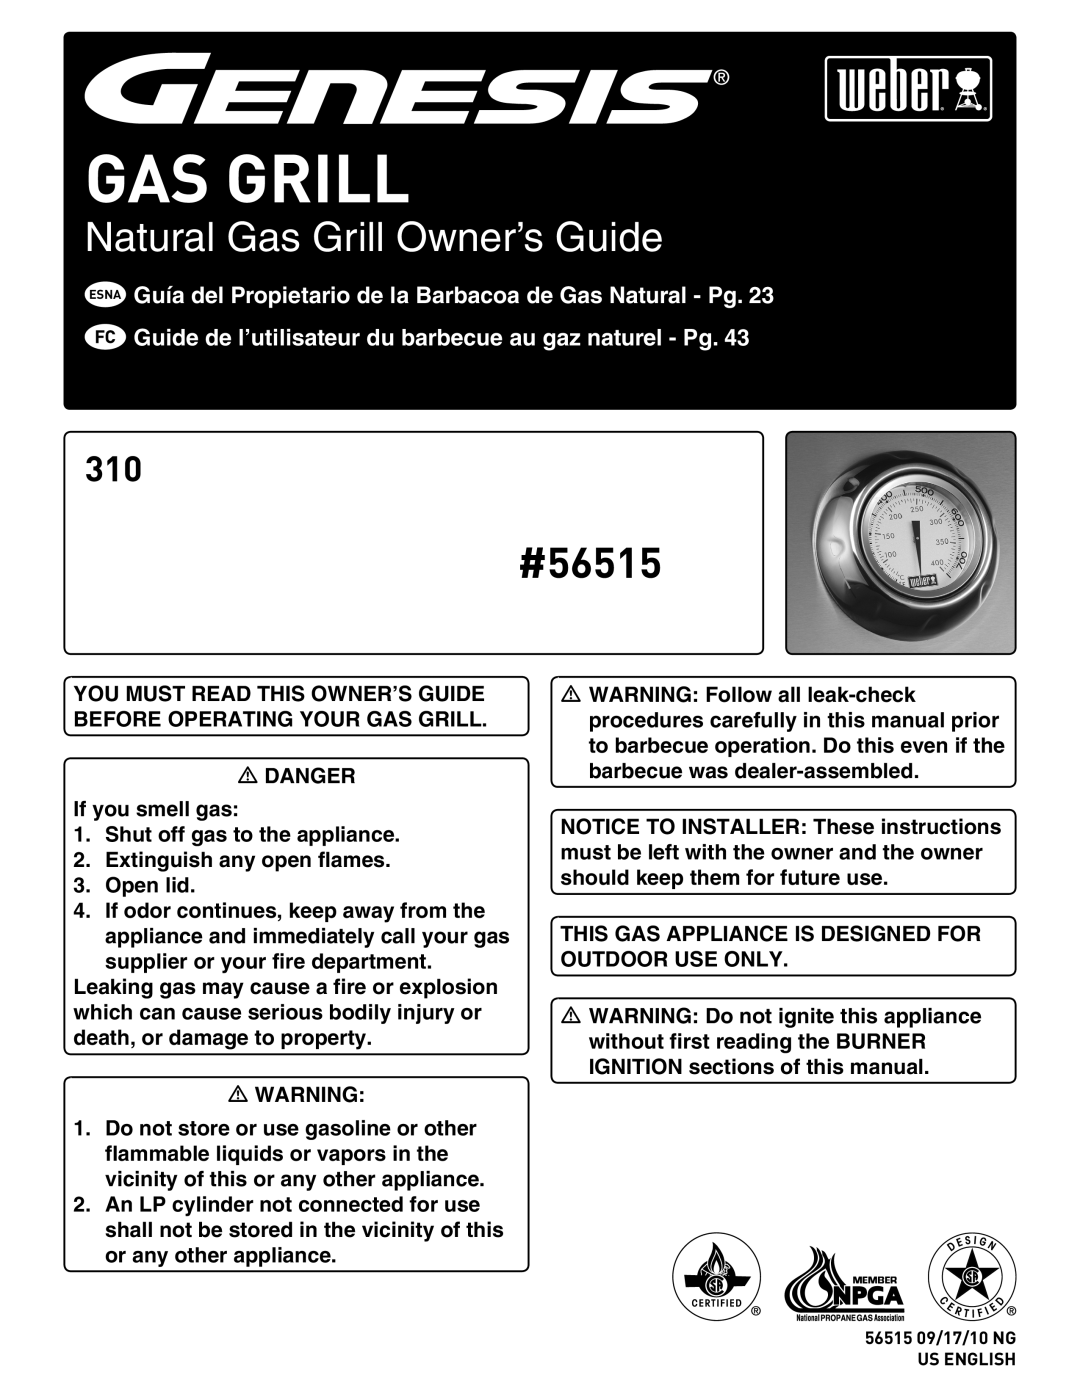 Weber manual #56515, Natural Gas Grill Owner’s Guide 